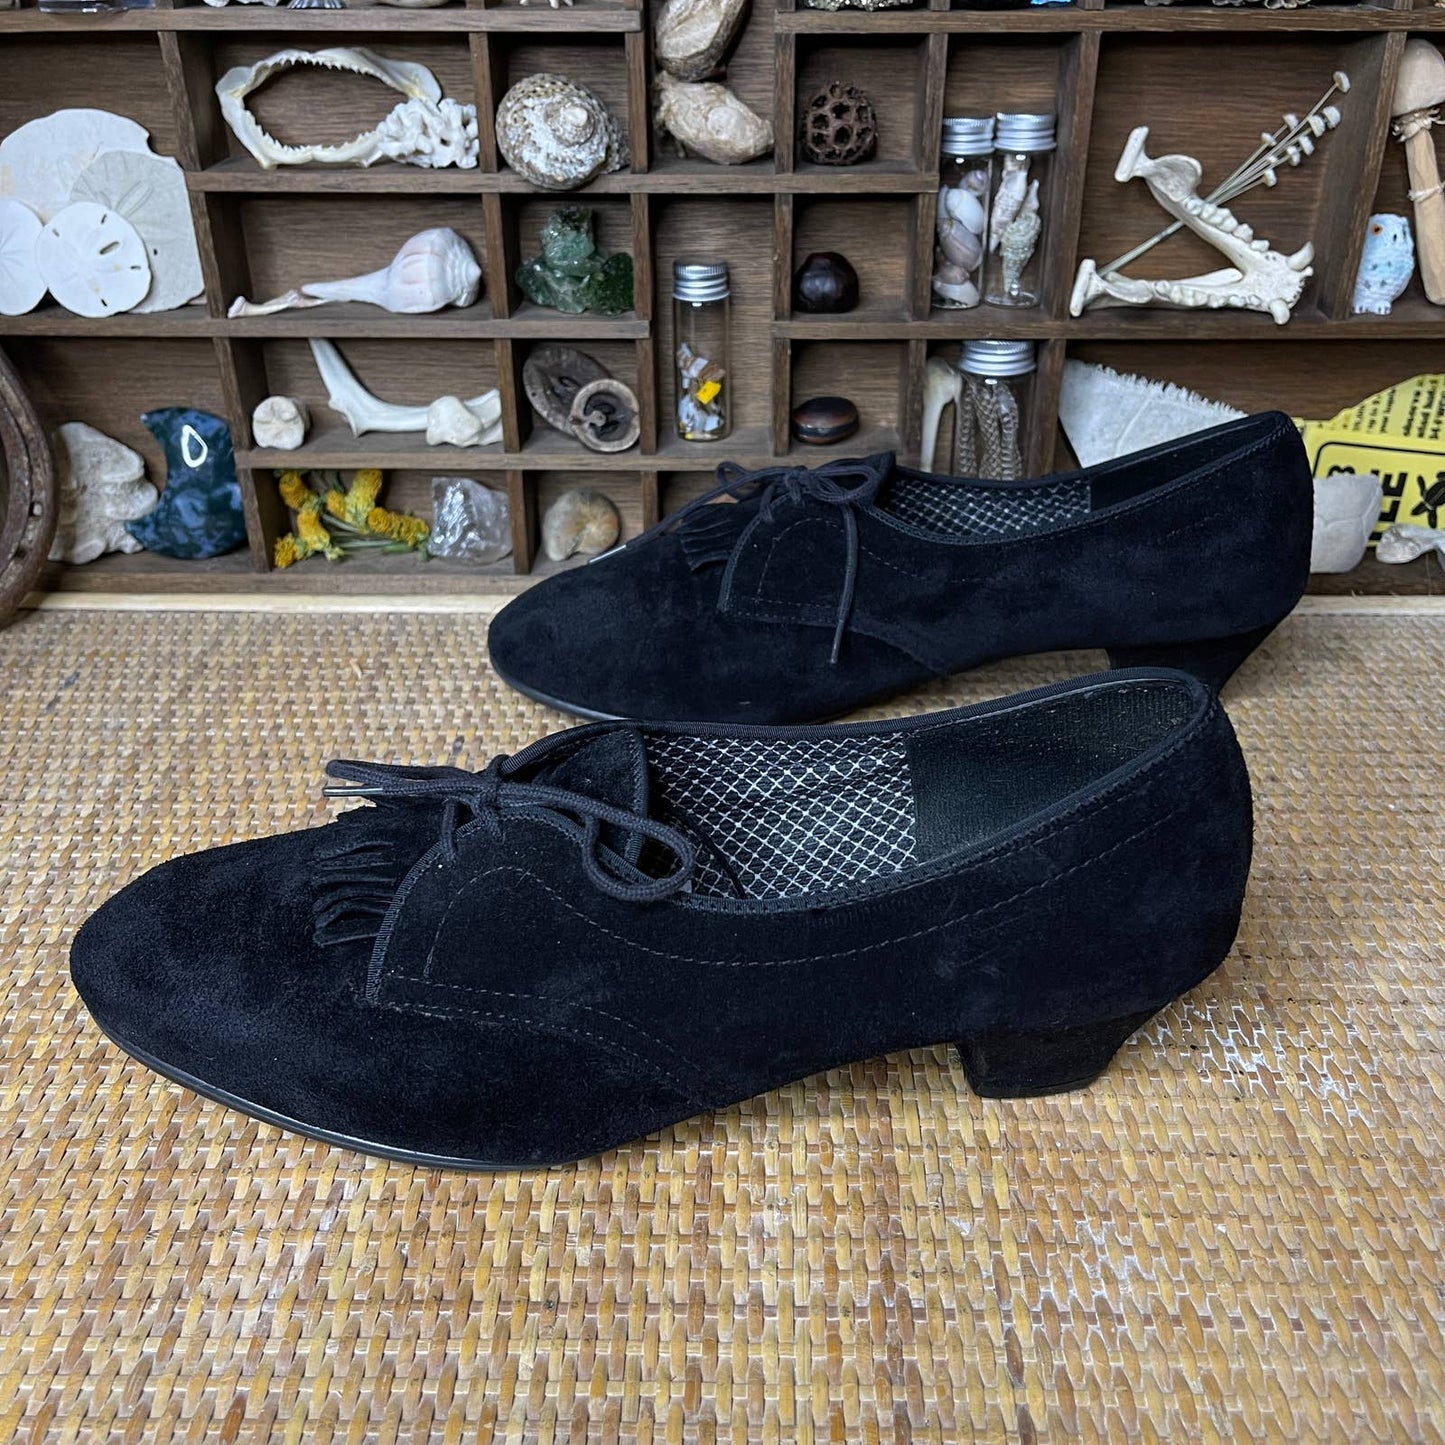 Vintage 90s Black Suede Kitten Heels Fringed Lace Up by Outdoorables Size 8